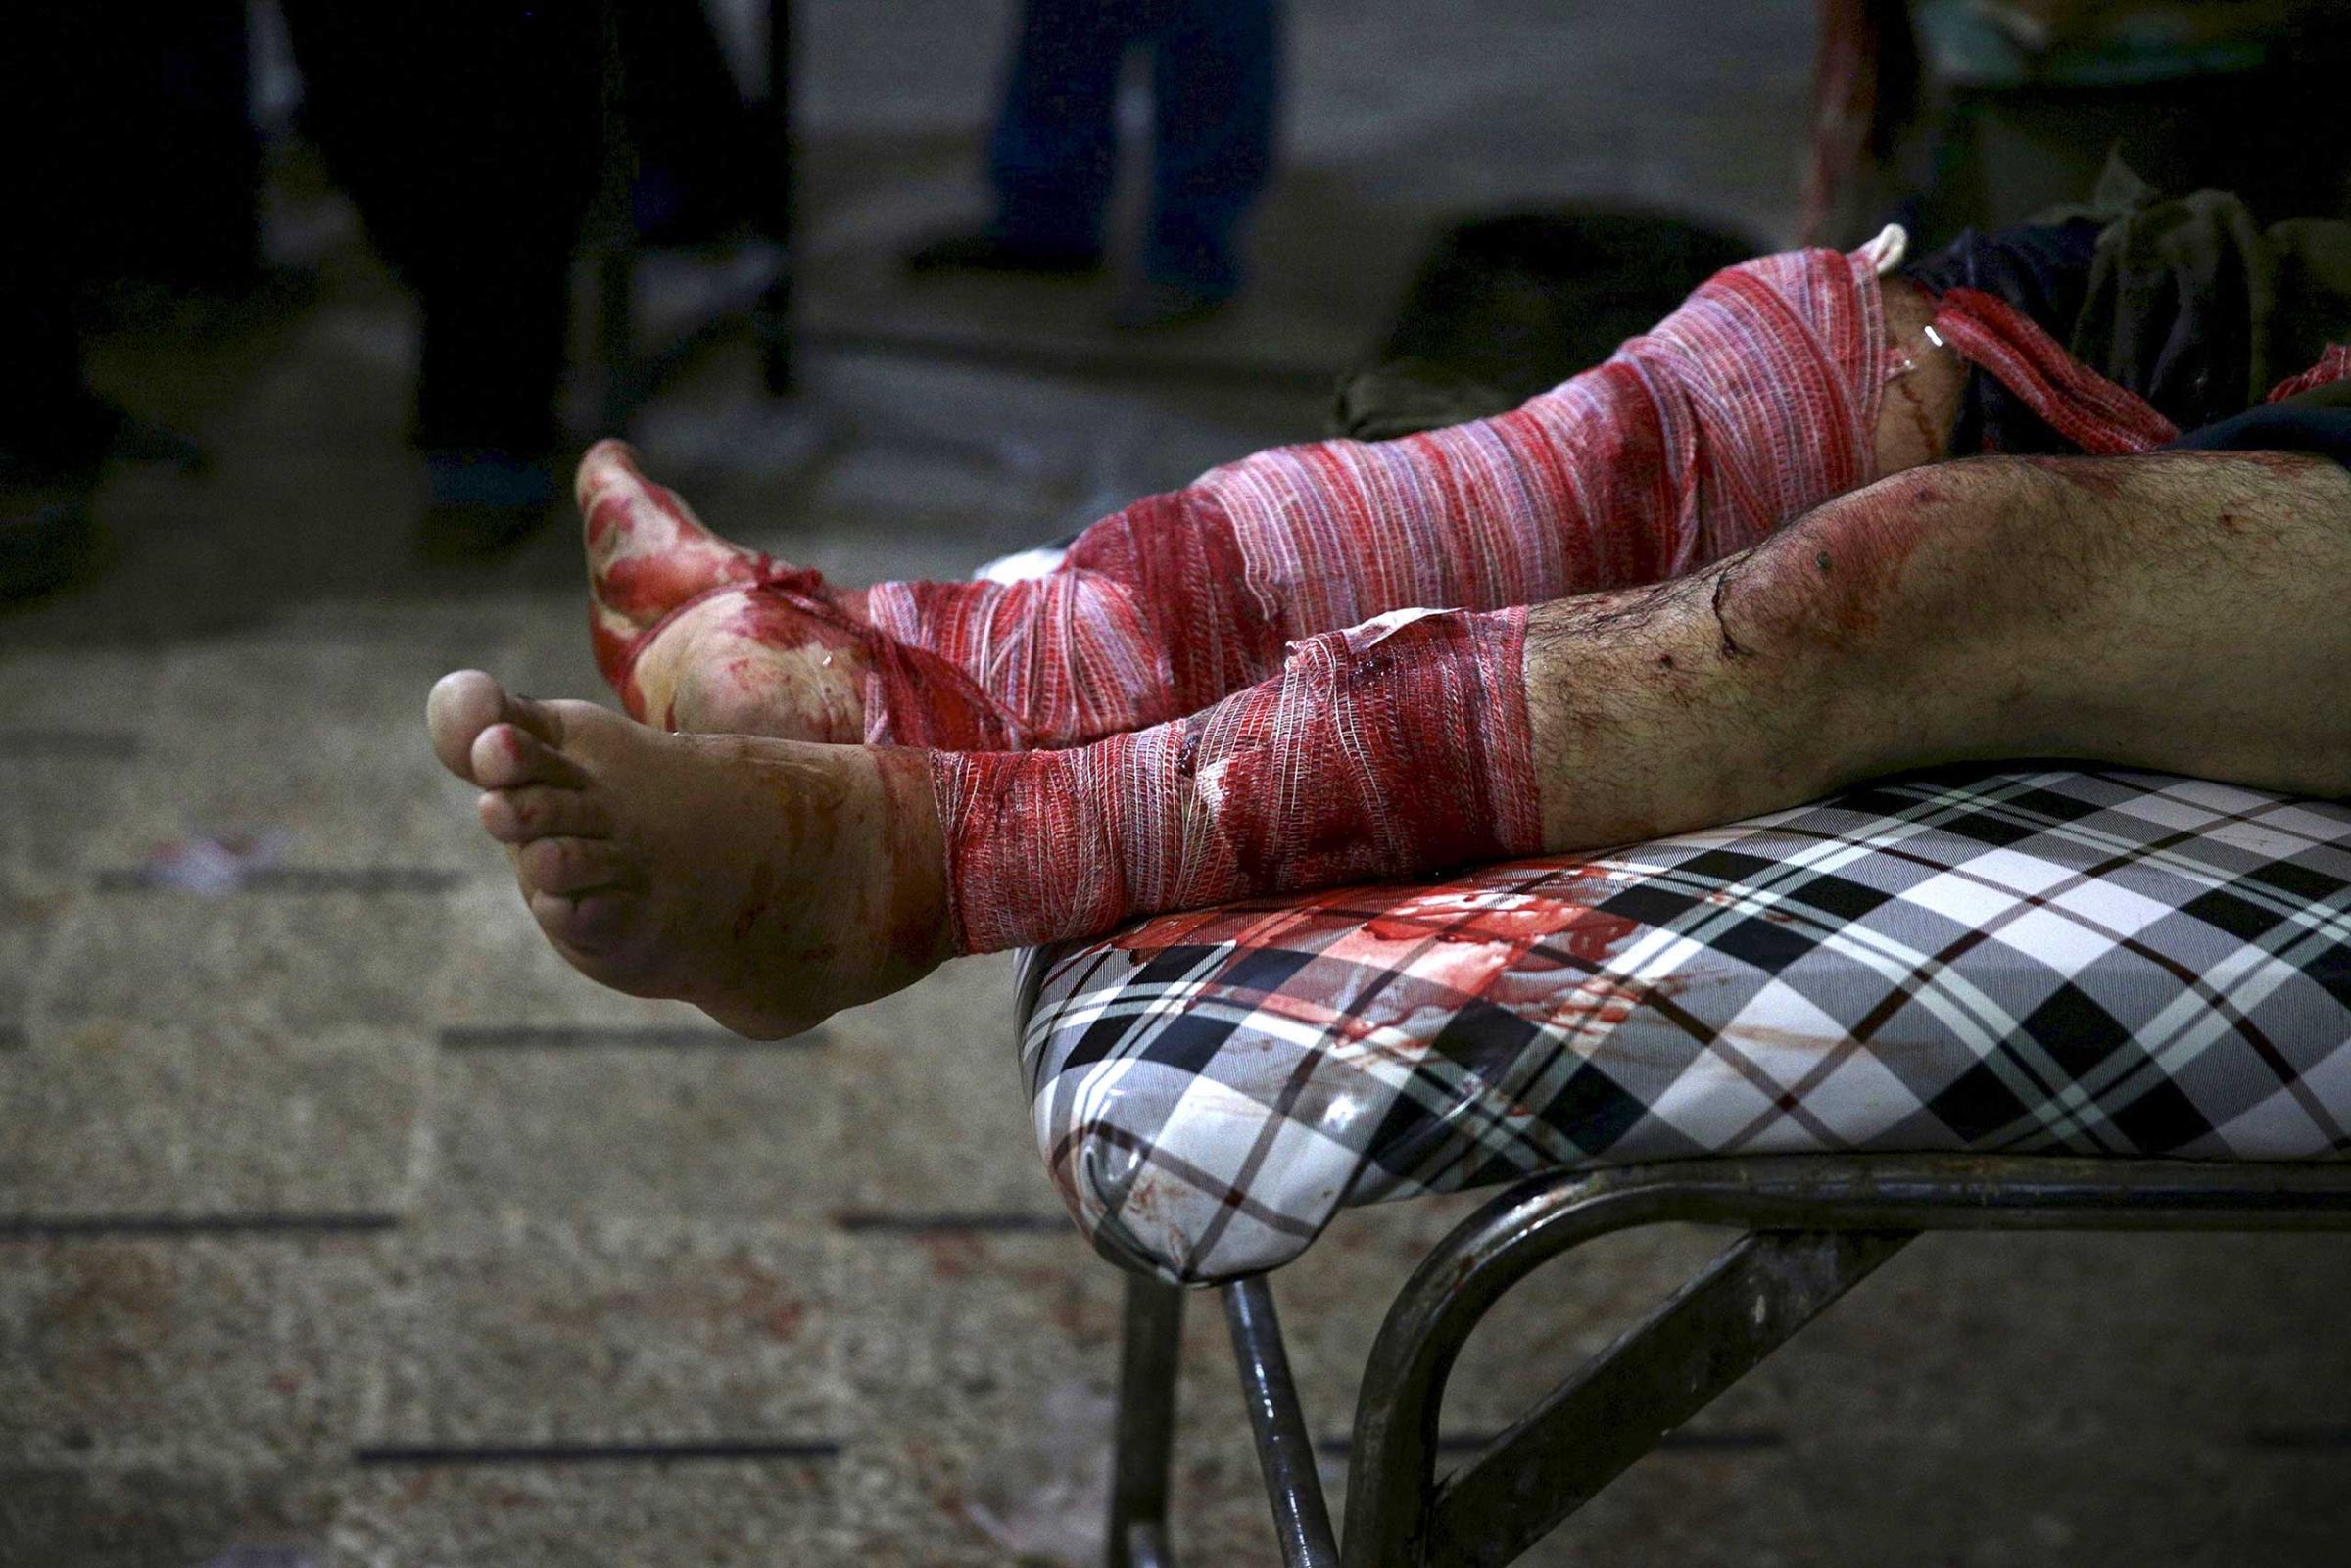 A man, injured in what activists said was an airstrike by forces loyal to Syria's president Bashar al-Assad, lies in a field hospital in the Douma neighborhood of Damascus, Syria December 6, 2015.